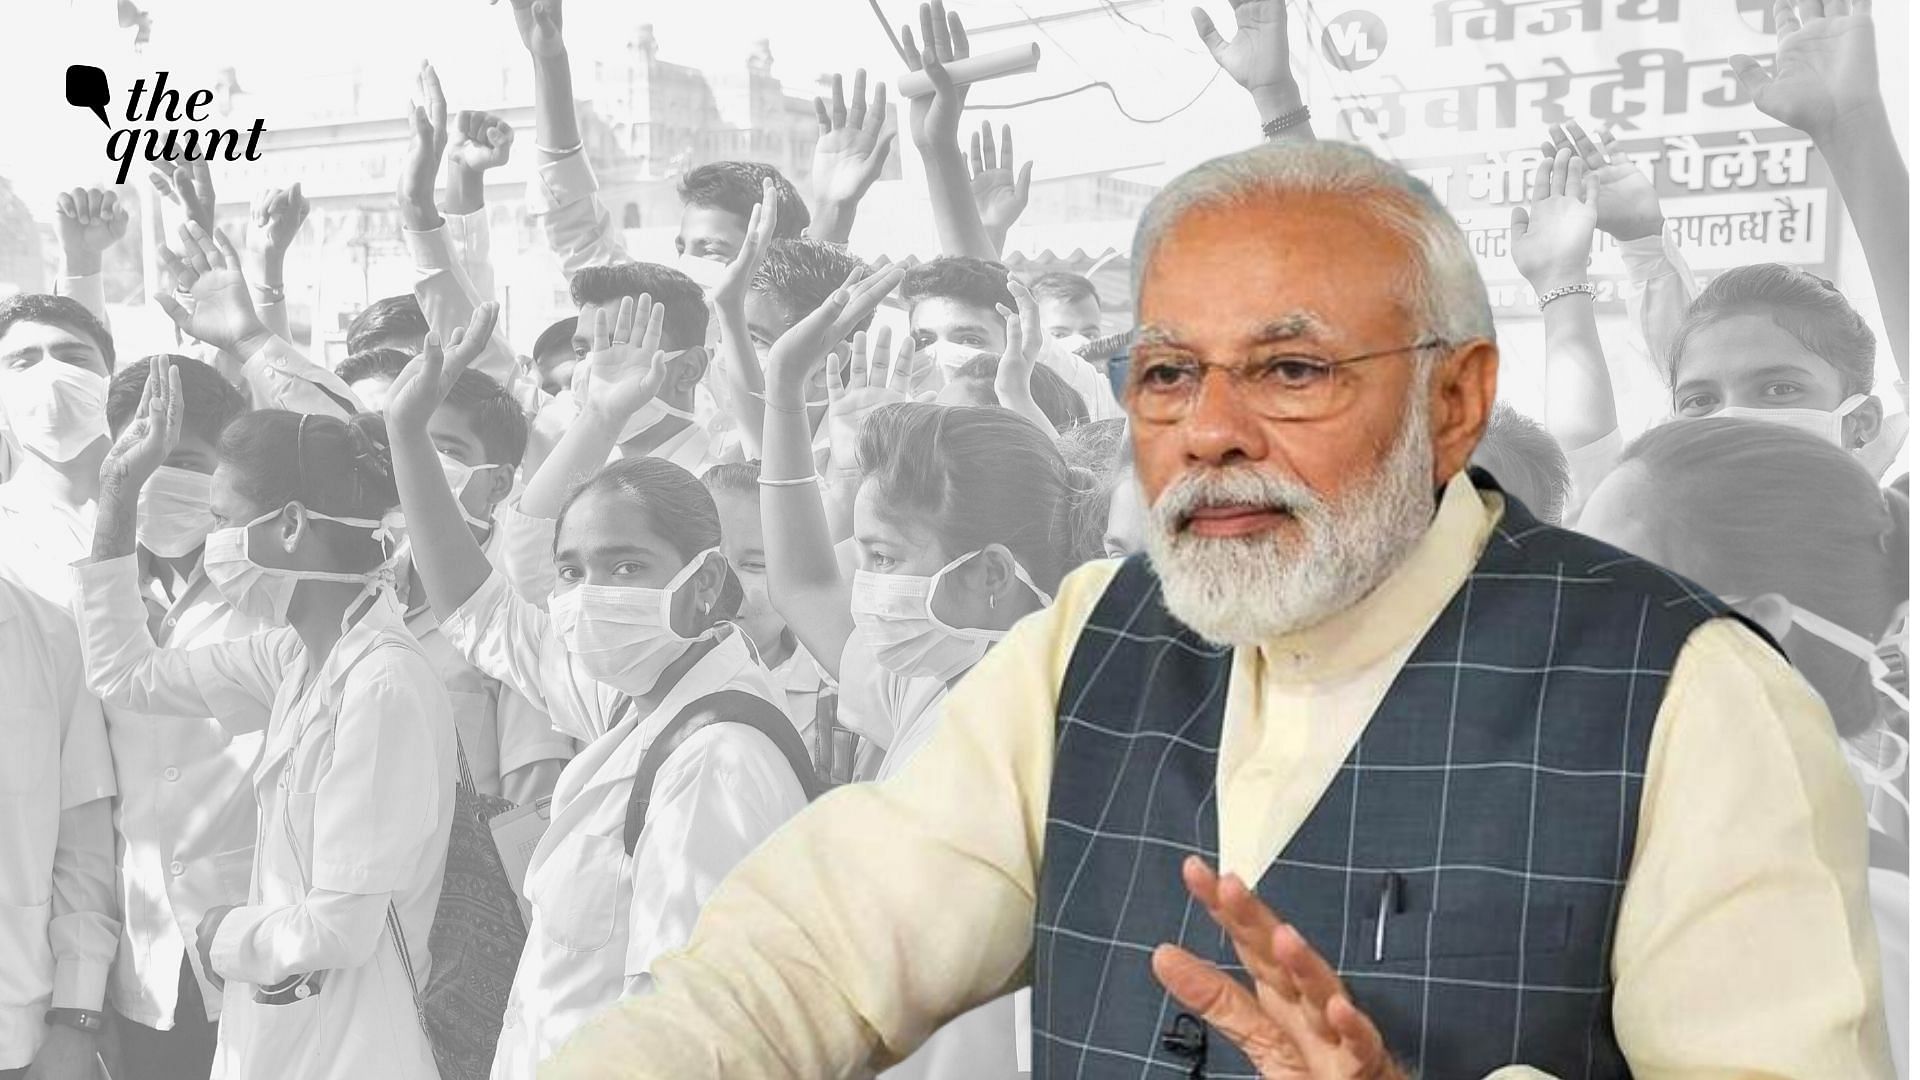 Prime Minister Narendra Modi on Wednesday, 25 March, interacted with the people of his parliamentary constituency of Varanasi amid nationwide lockdown in the wake of coronavirus outbreak.